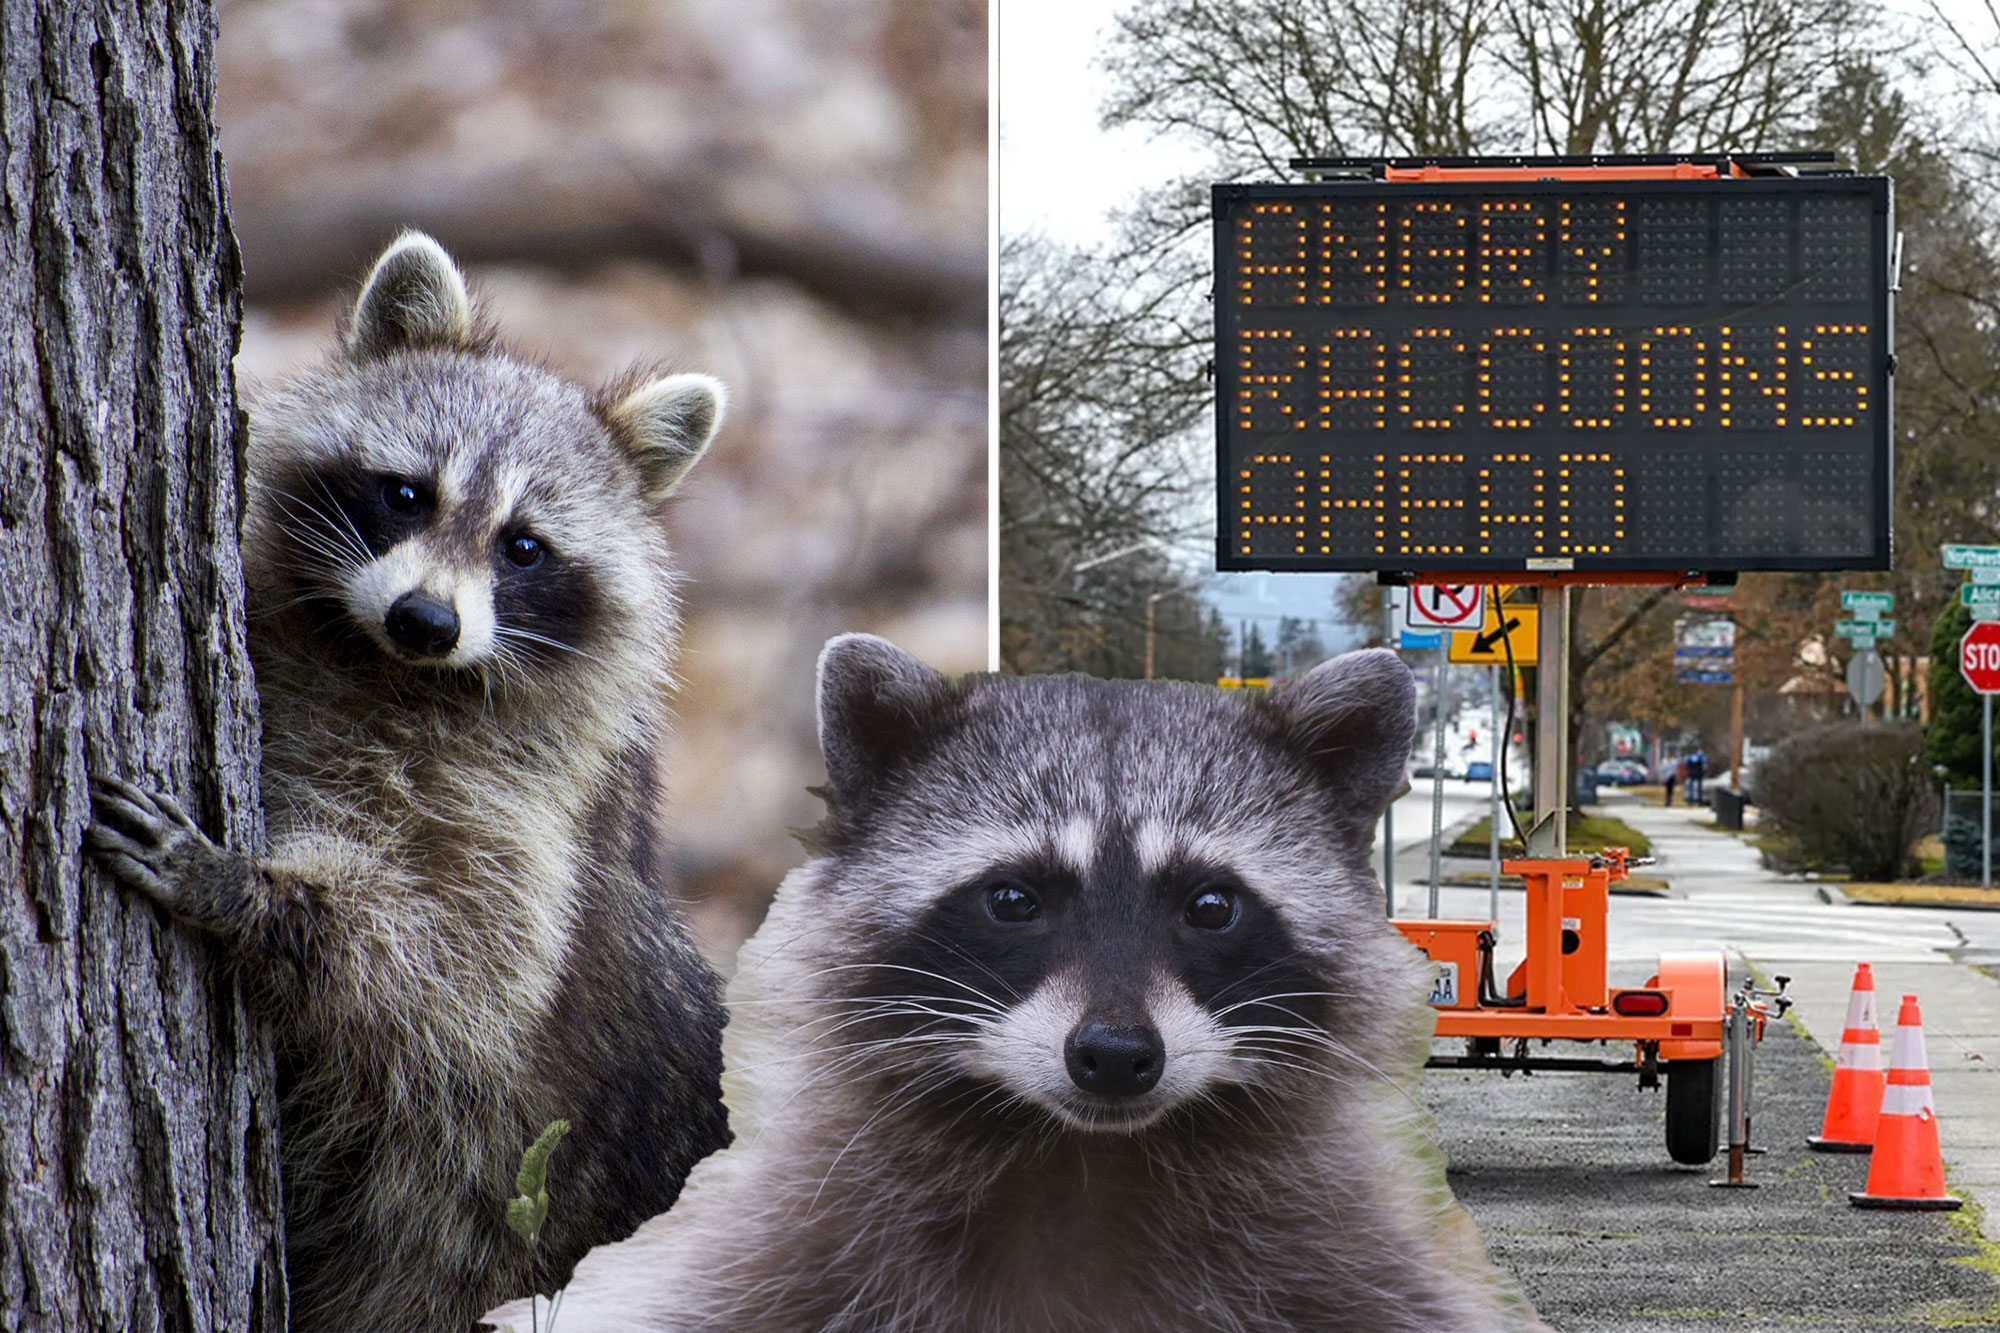 Sign in Washington hacked to display surprising warning about ‘angry raccoons’